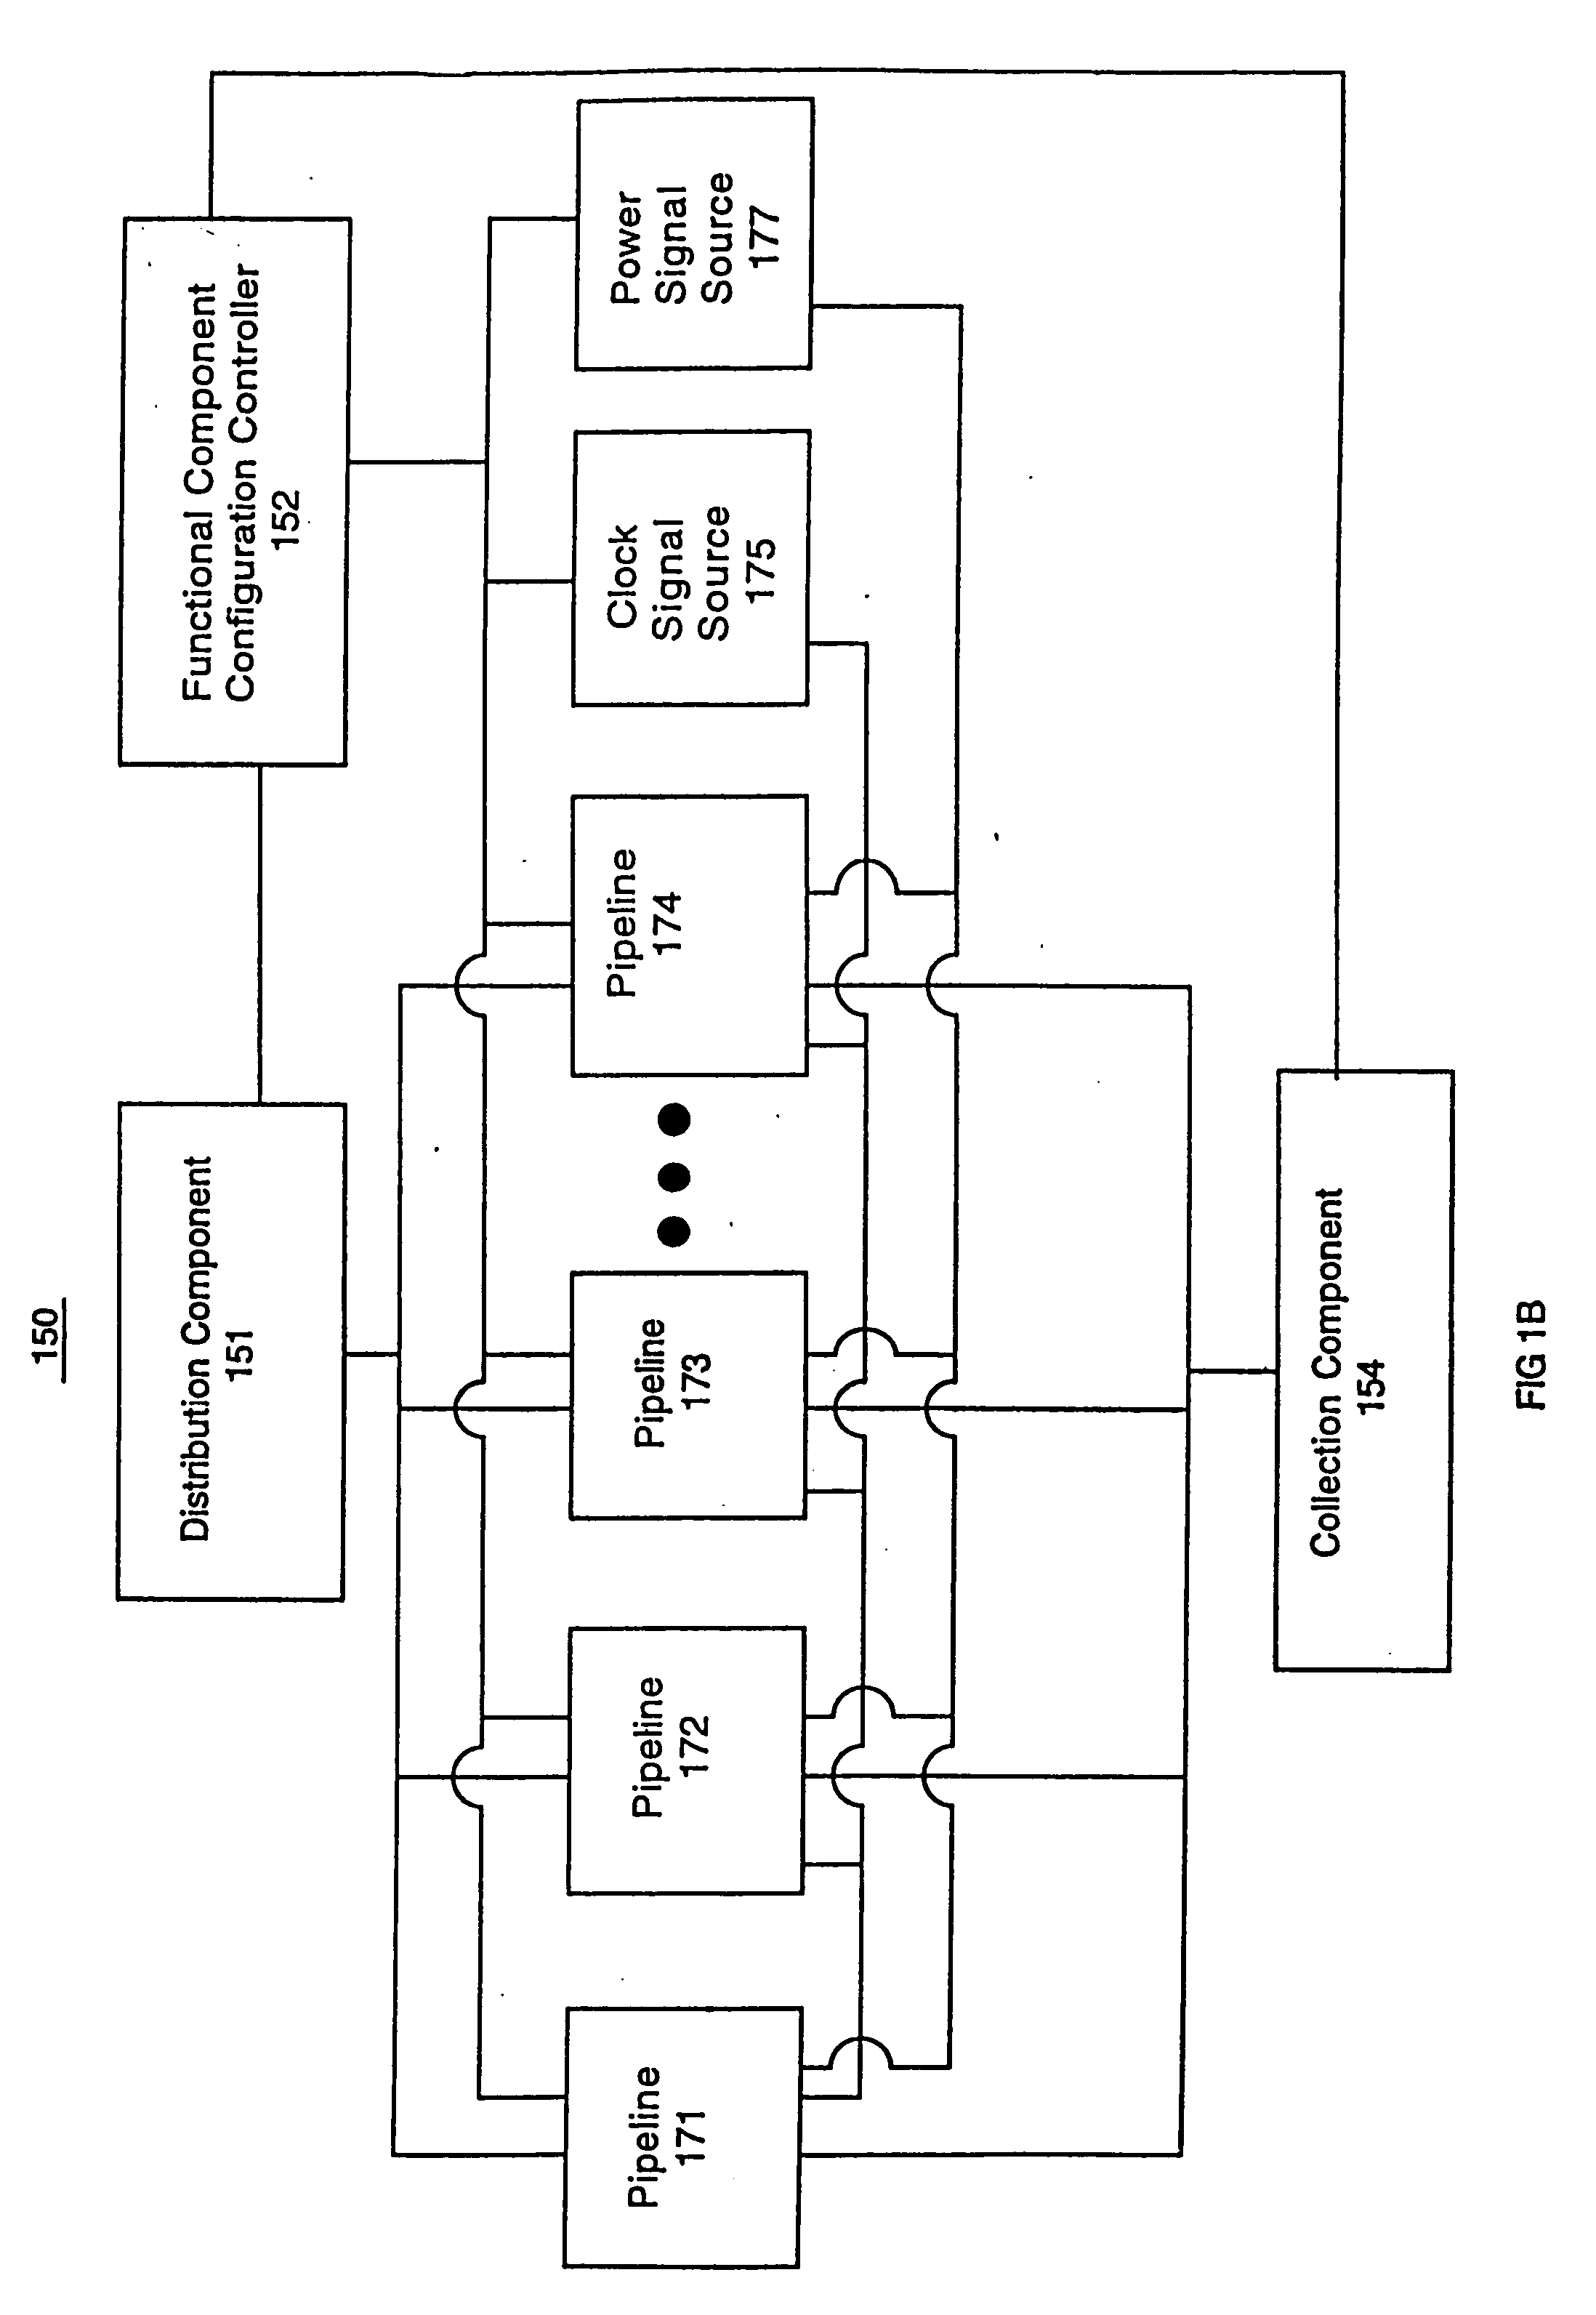 System and method for testing and configuring semiconductor functional circuits